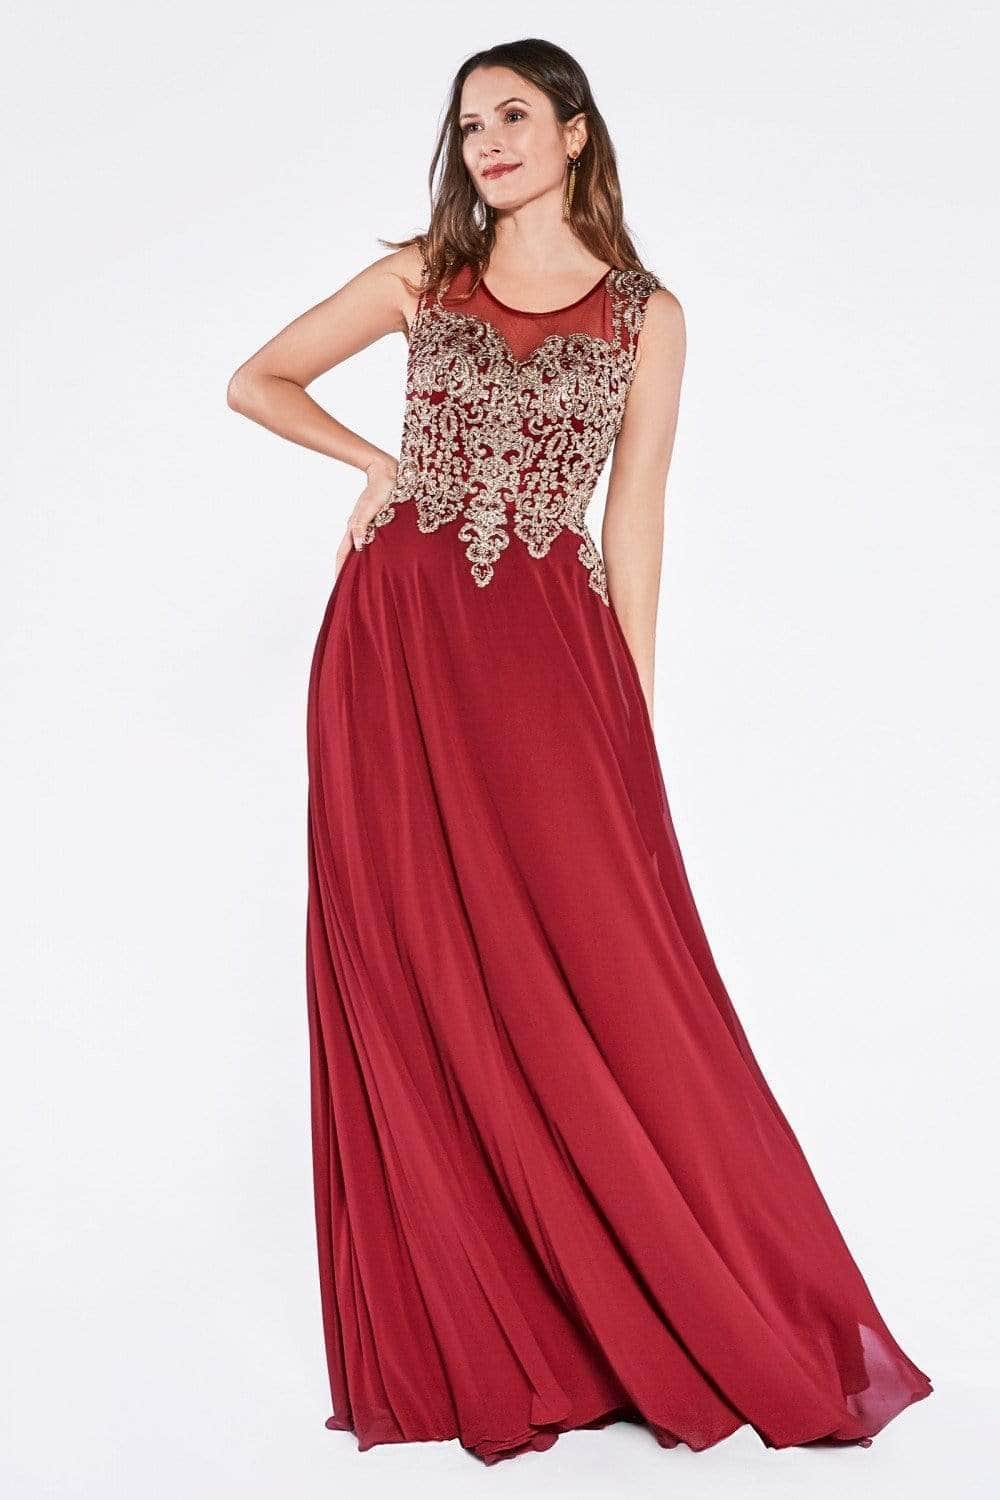 Ladivine 2635 Special Occasion Dress XS / Burgundy-Gold